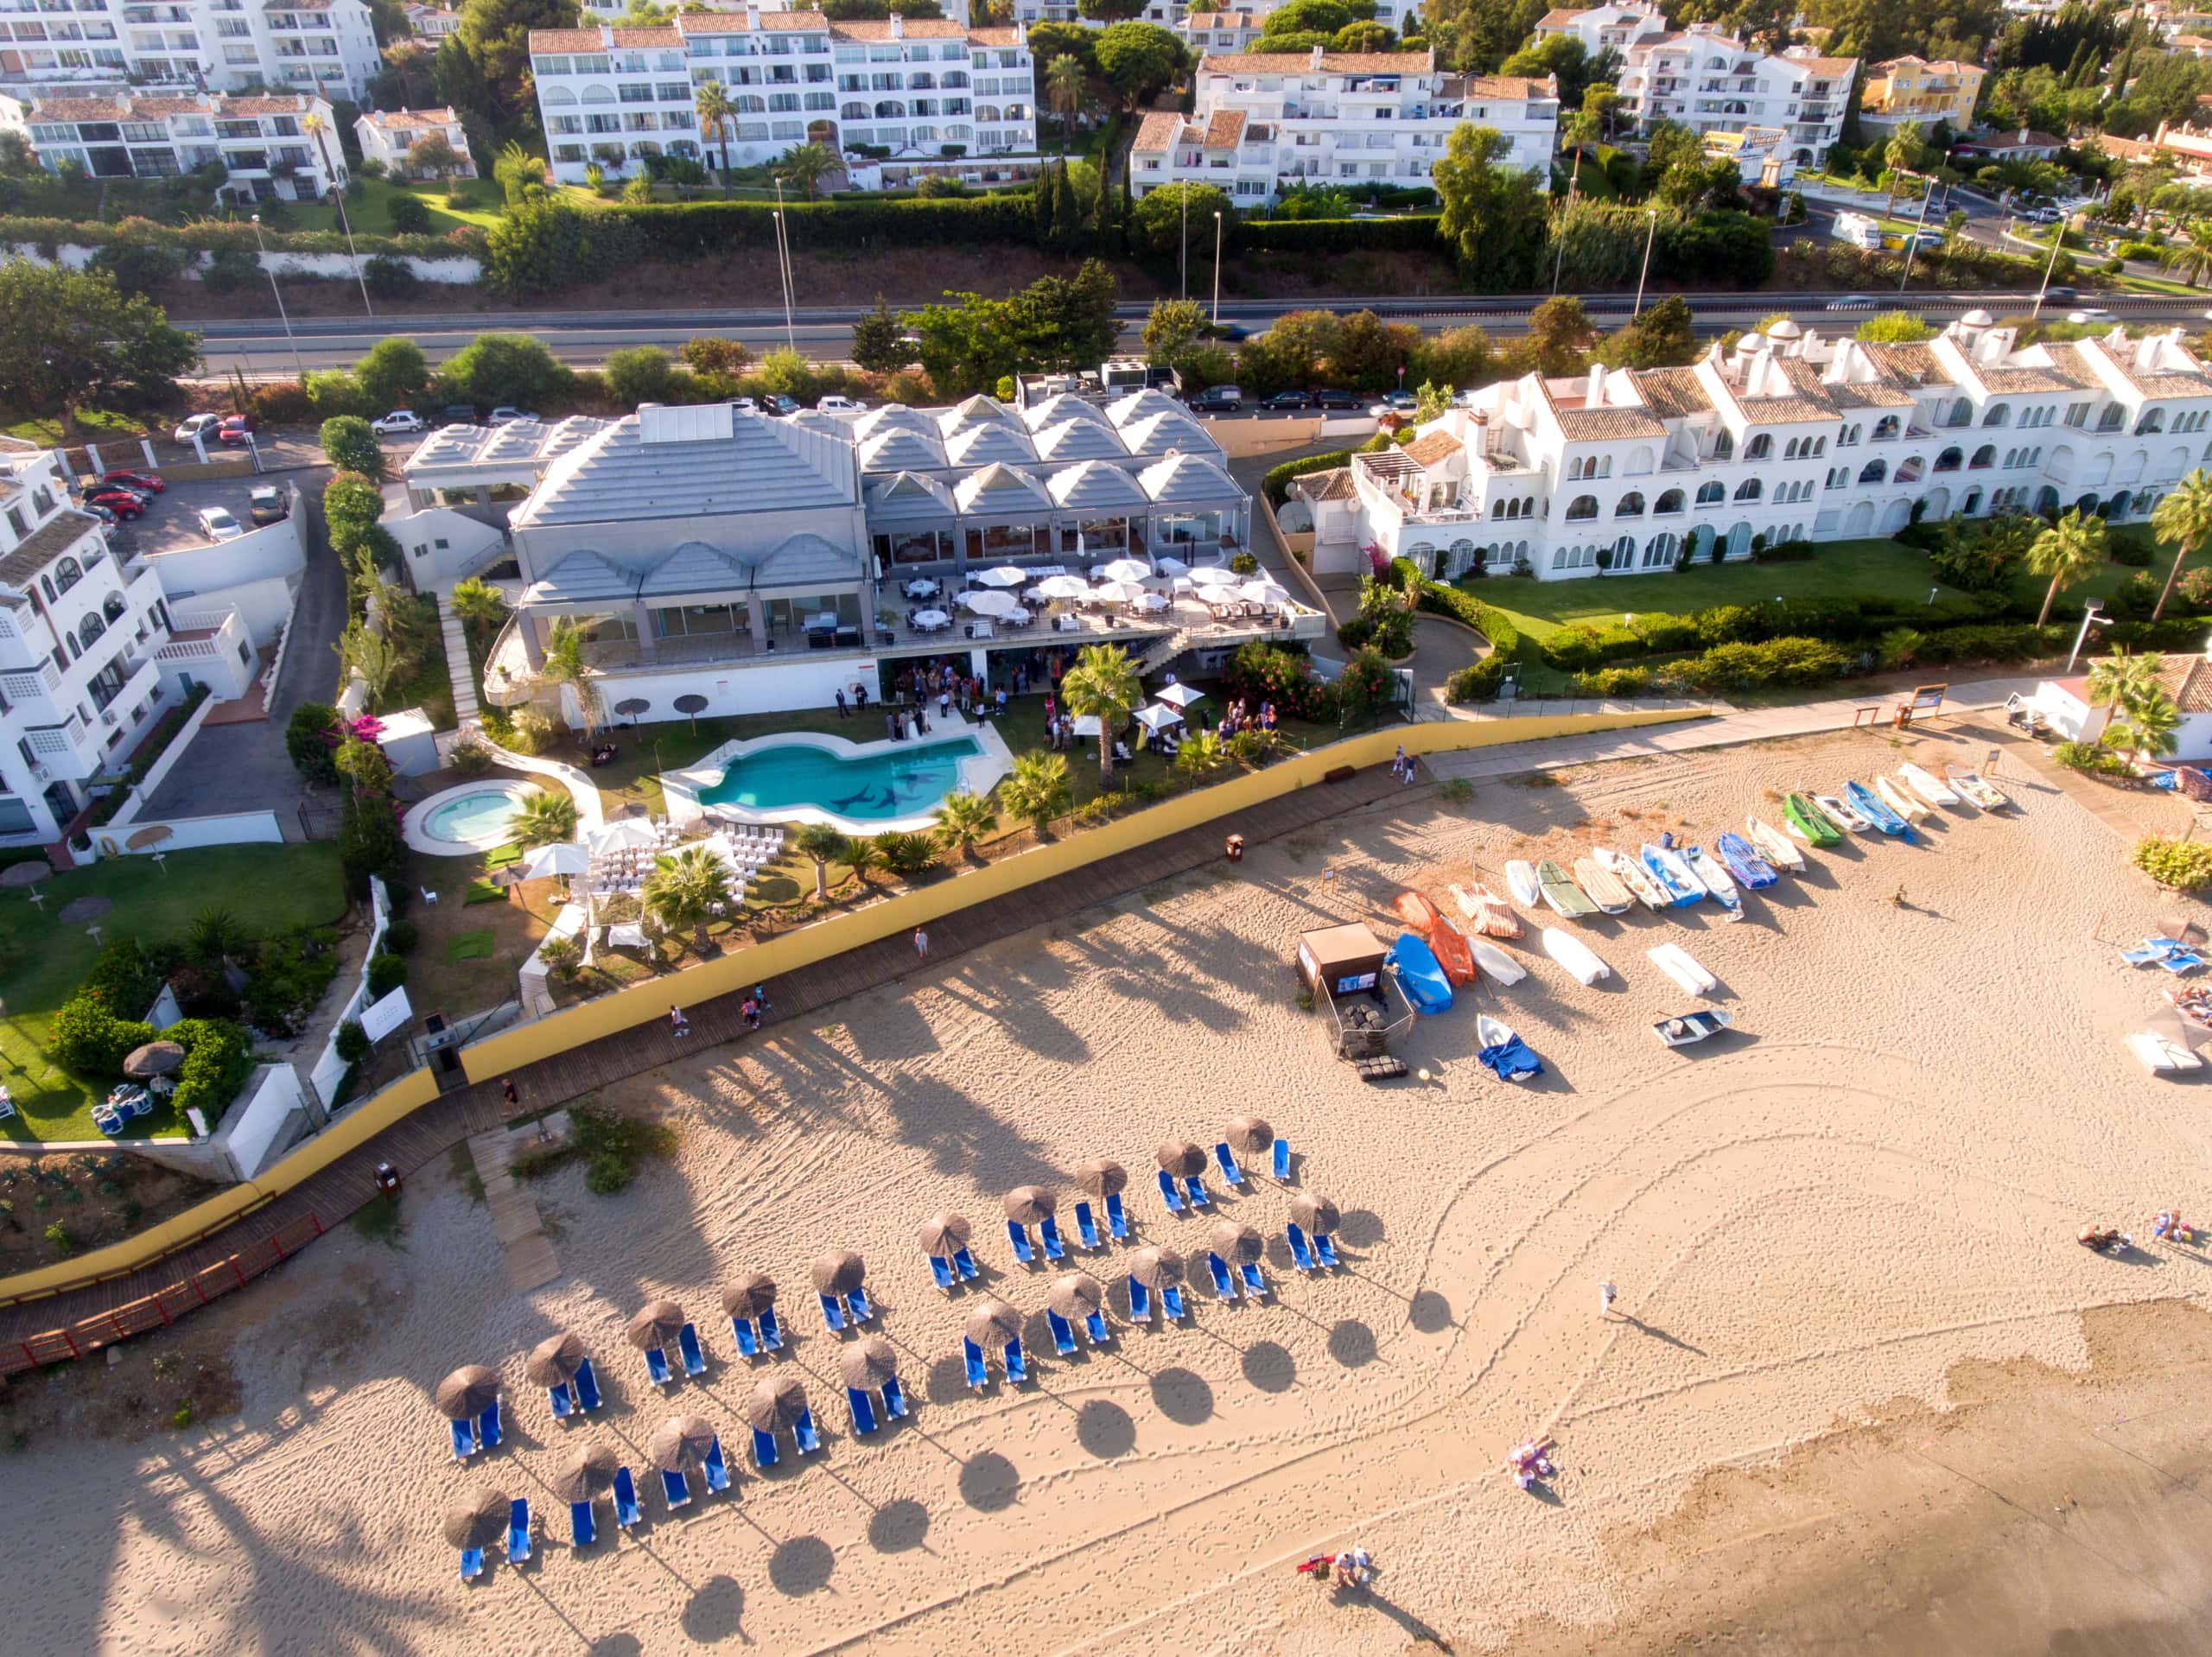 Aerial view of the stunning Marbella coastline captured from a drone. Photo by Dougie Farrelly, renowned Irish Professional Wedding Photographer. Collaboration with Silverscreen Film & Photography